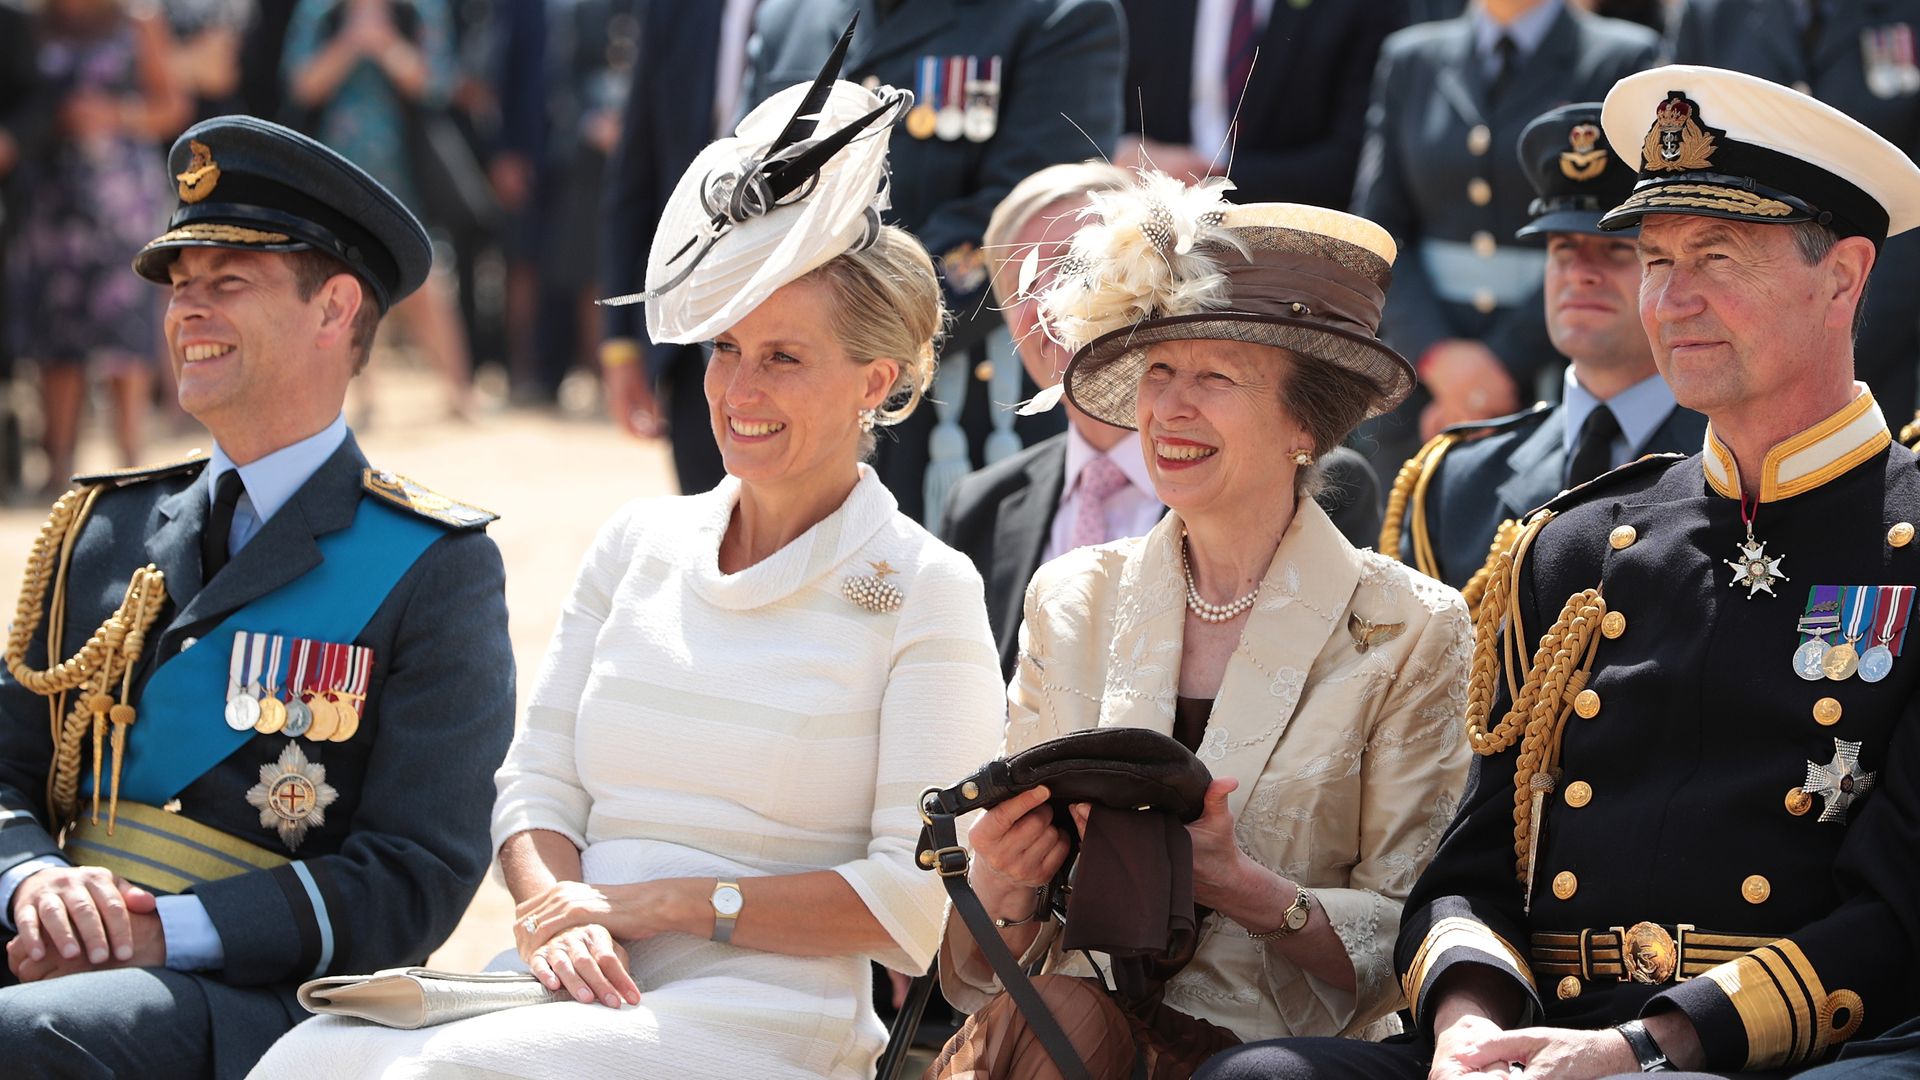 The Duke and Duchess of Edinburgh and Princess Anne and Vice Admiral Sir Tim Laurence